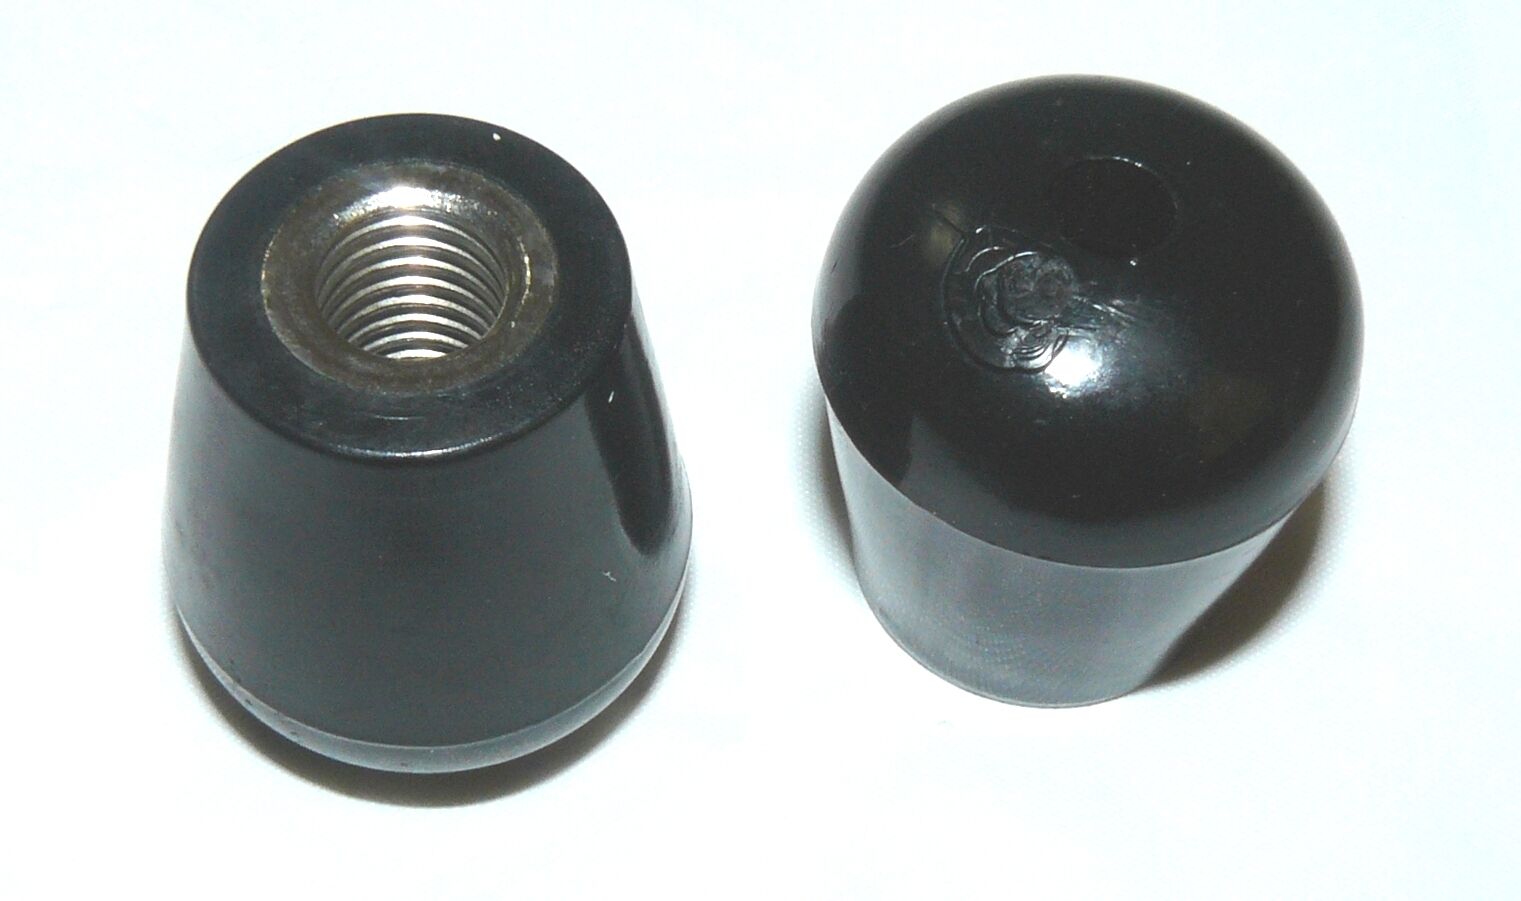 New Threaded Rubber Feet Or Tips For Bass Drum Spurs Set Of 2 Fits Most Spurs